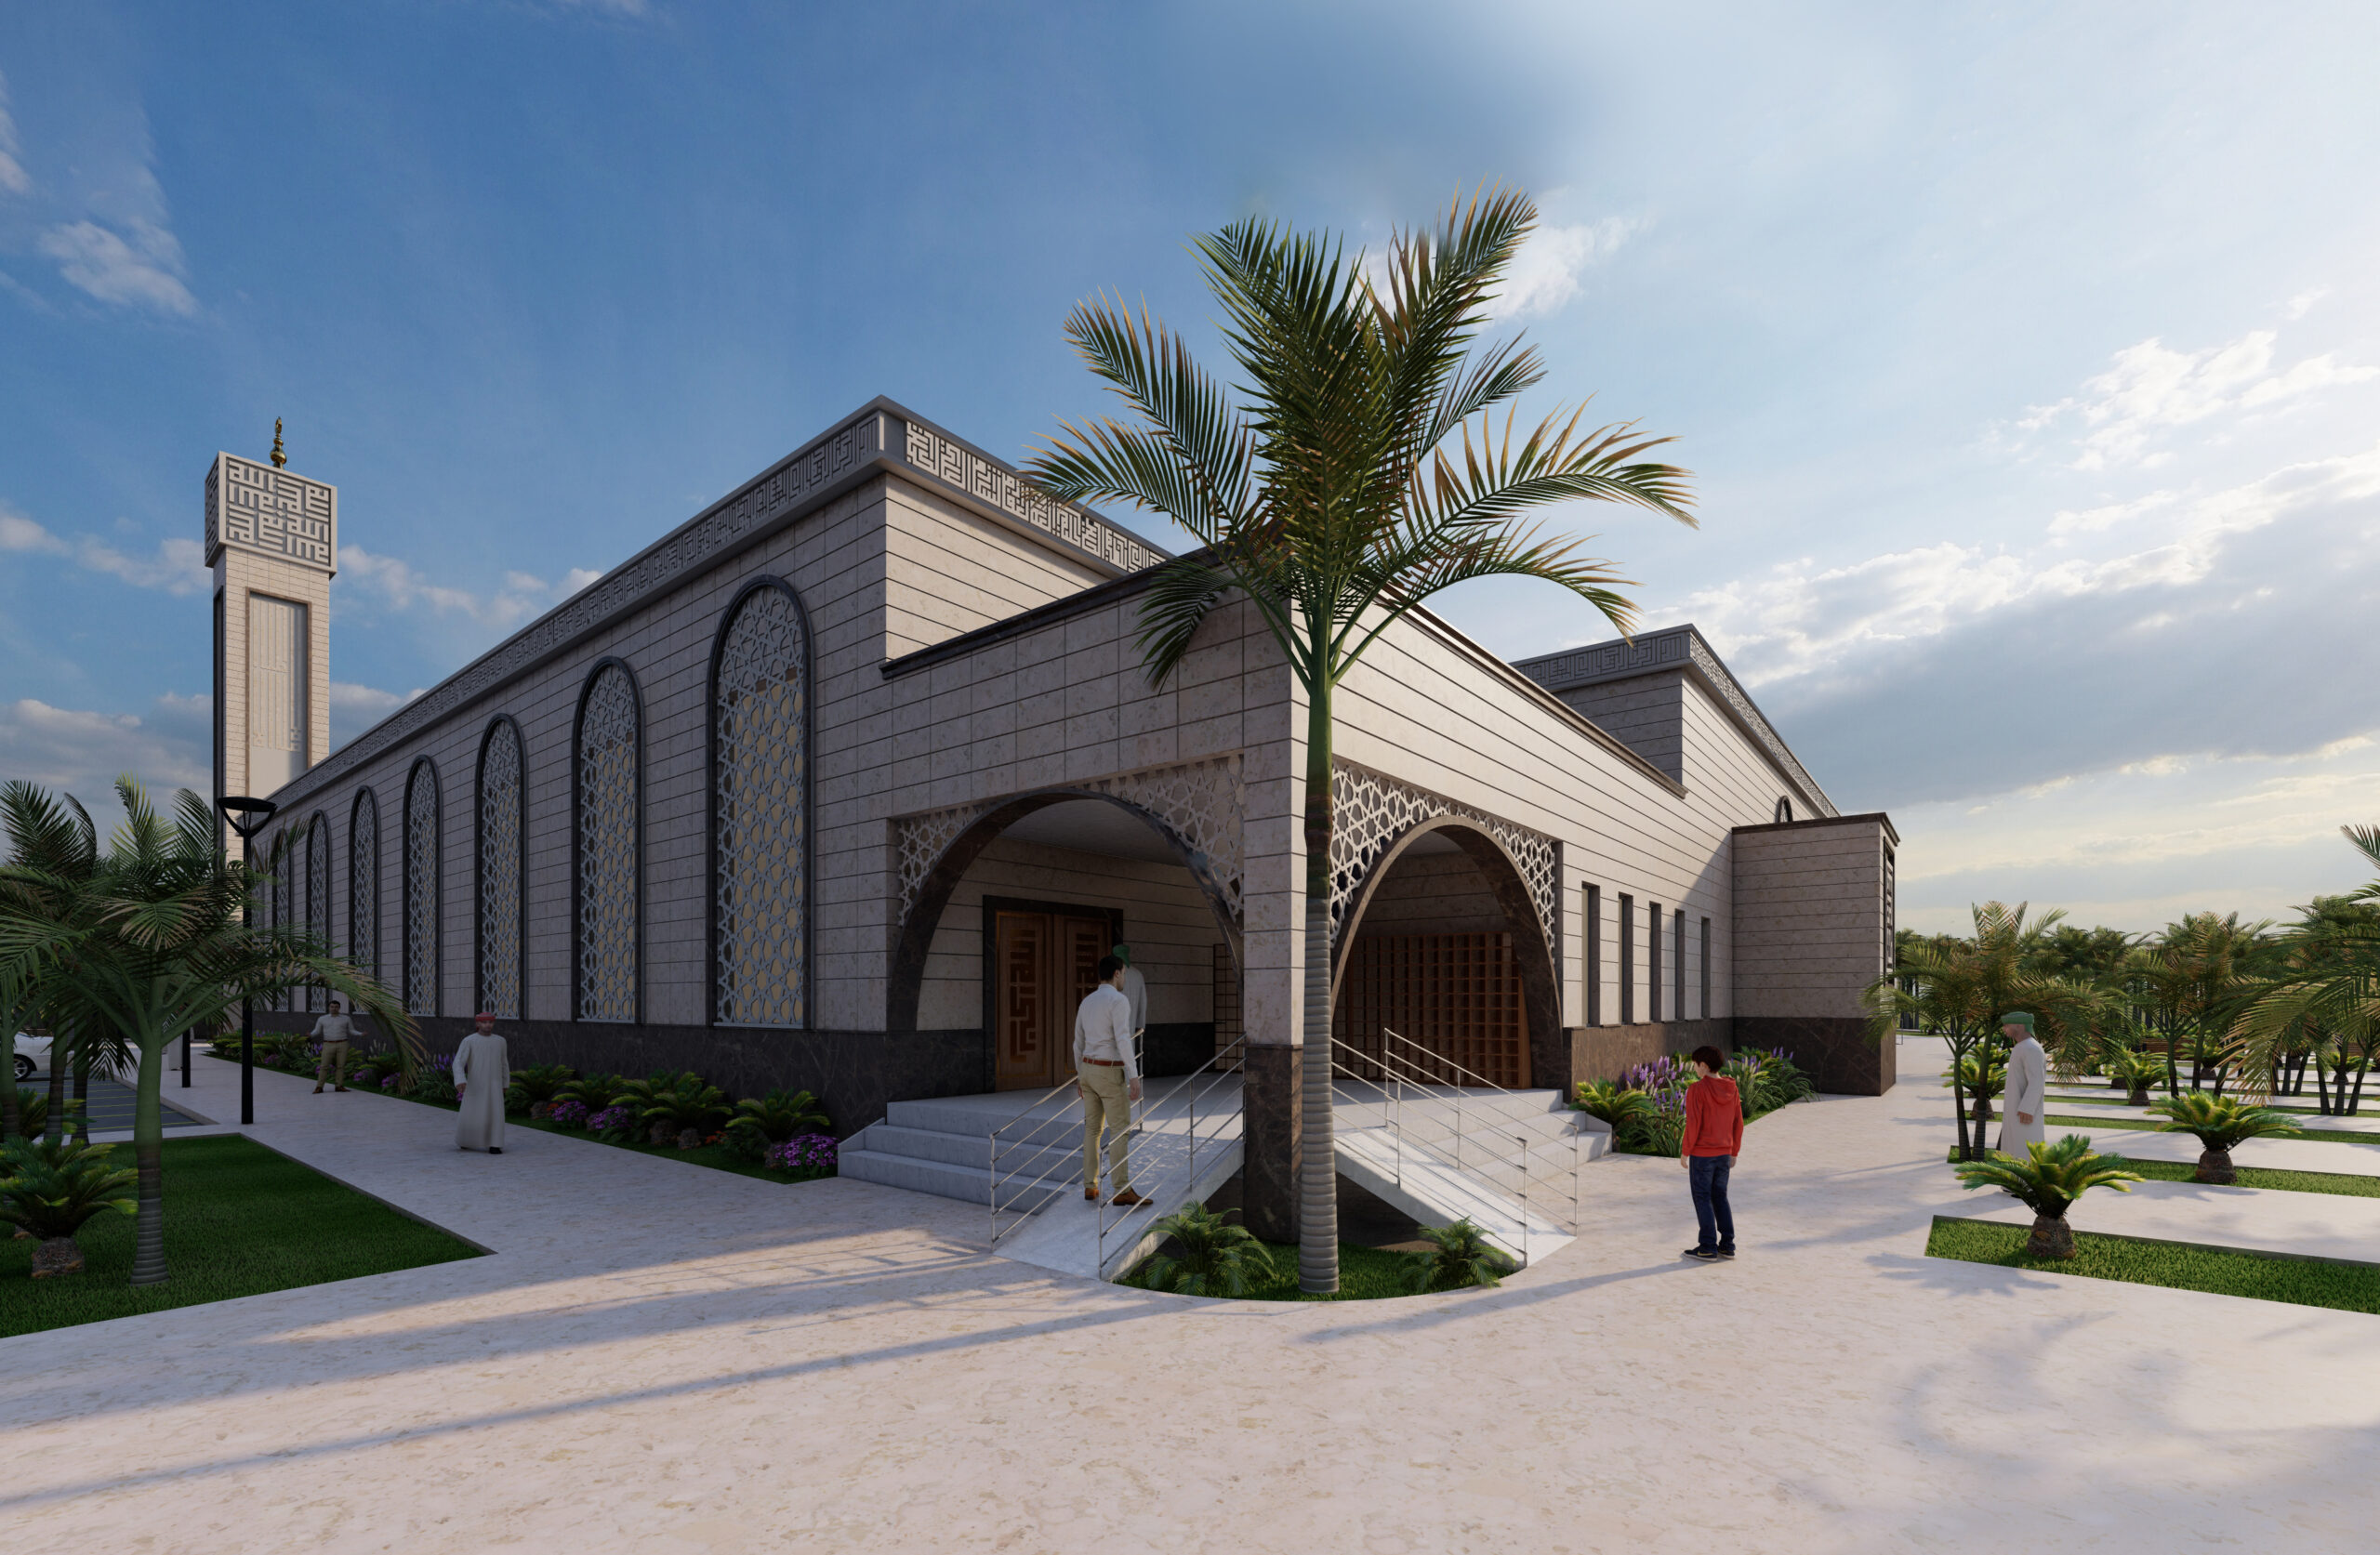 Design of Tuhayyi Mosque in Riyadh, area of 2,200 square meters and capacity for 2,000 worshipers, 2023